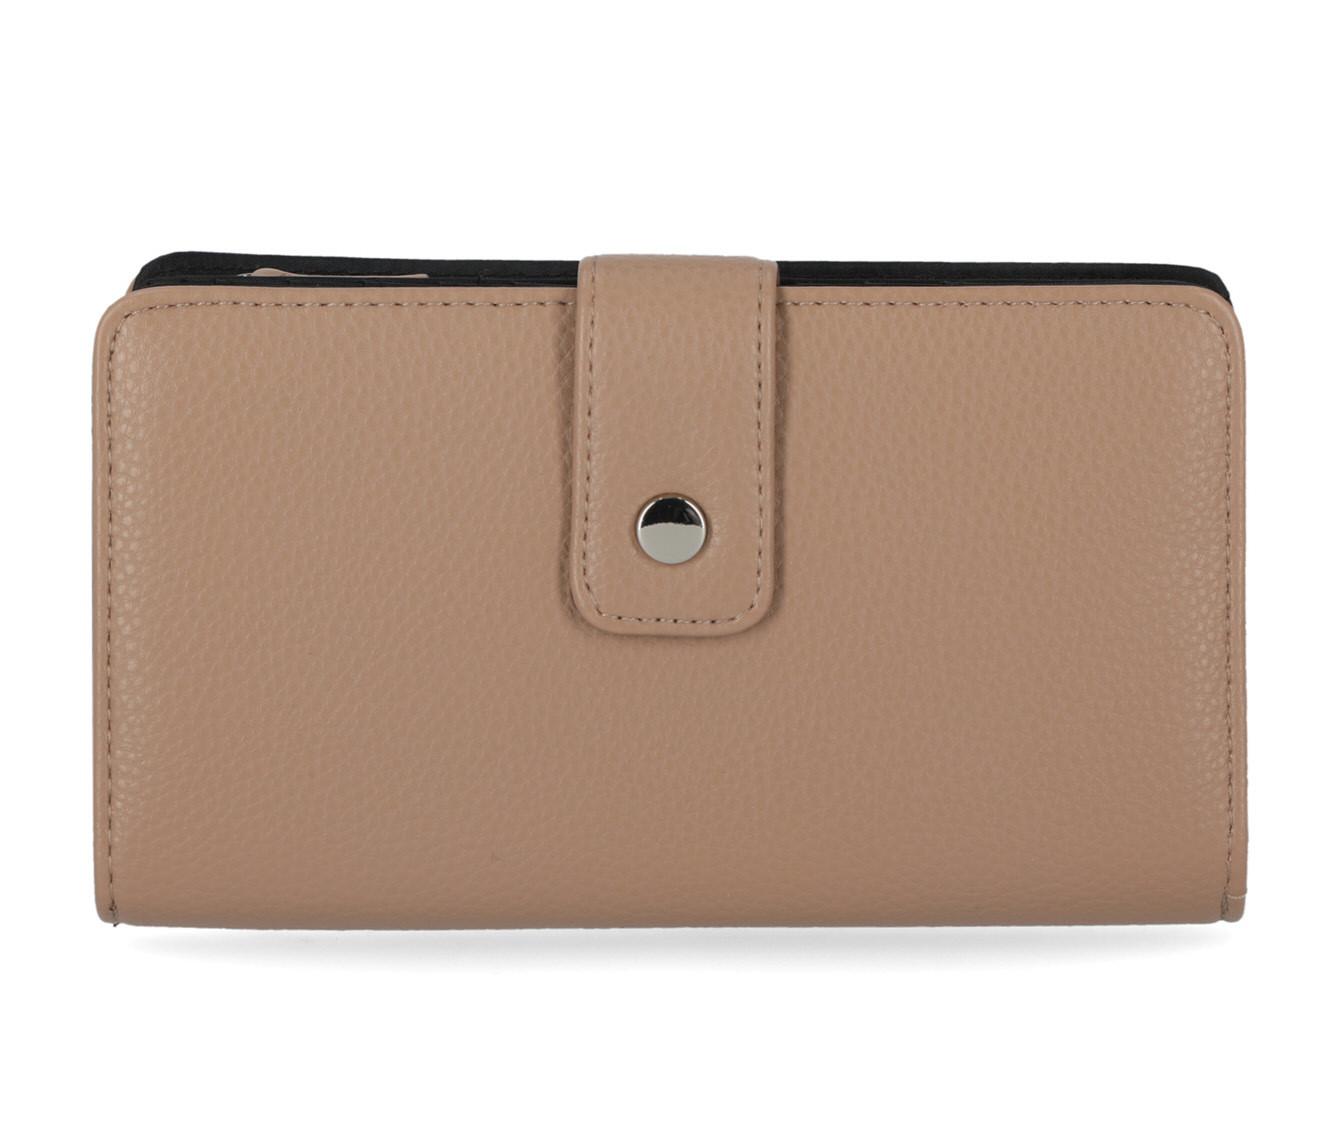 Hot Sell - Never Miss Promotions Mundi/Westport Corp. Tab Clutch On ...